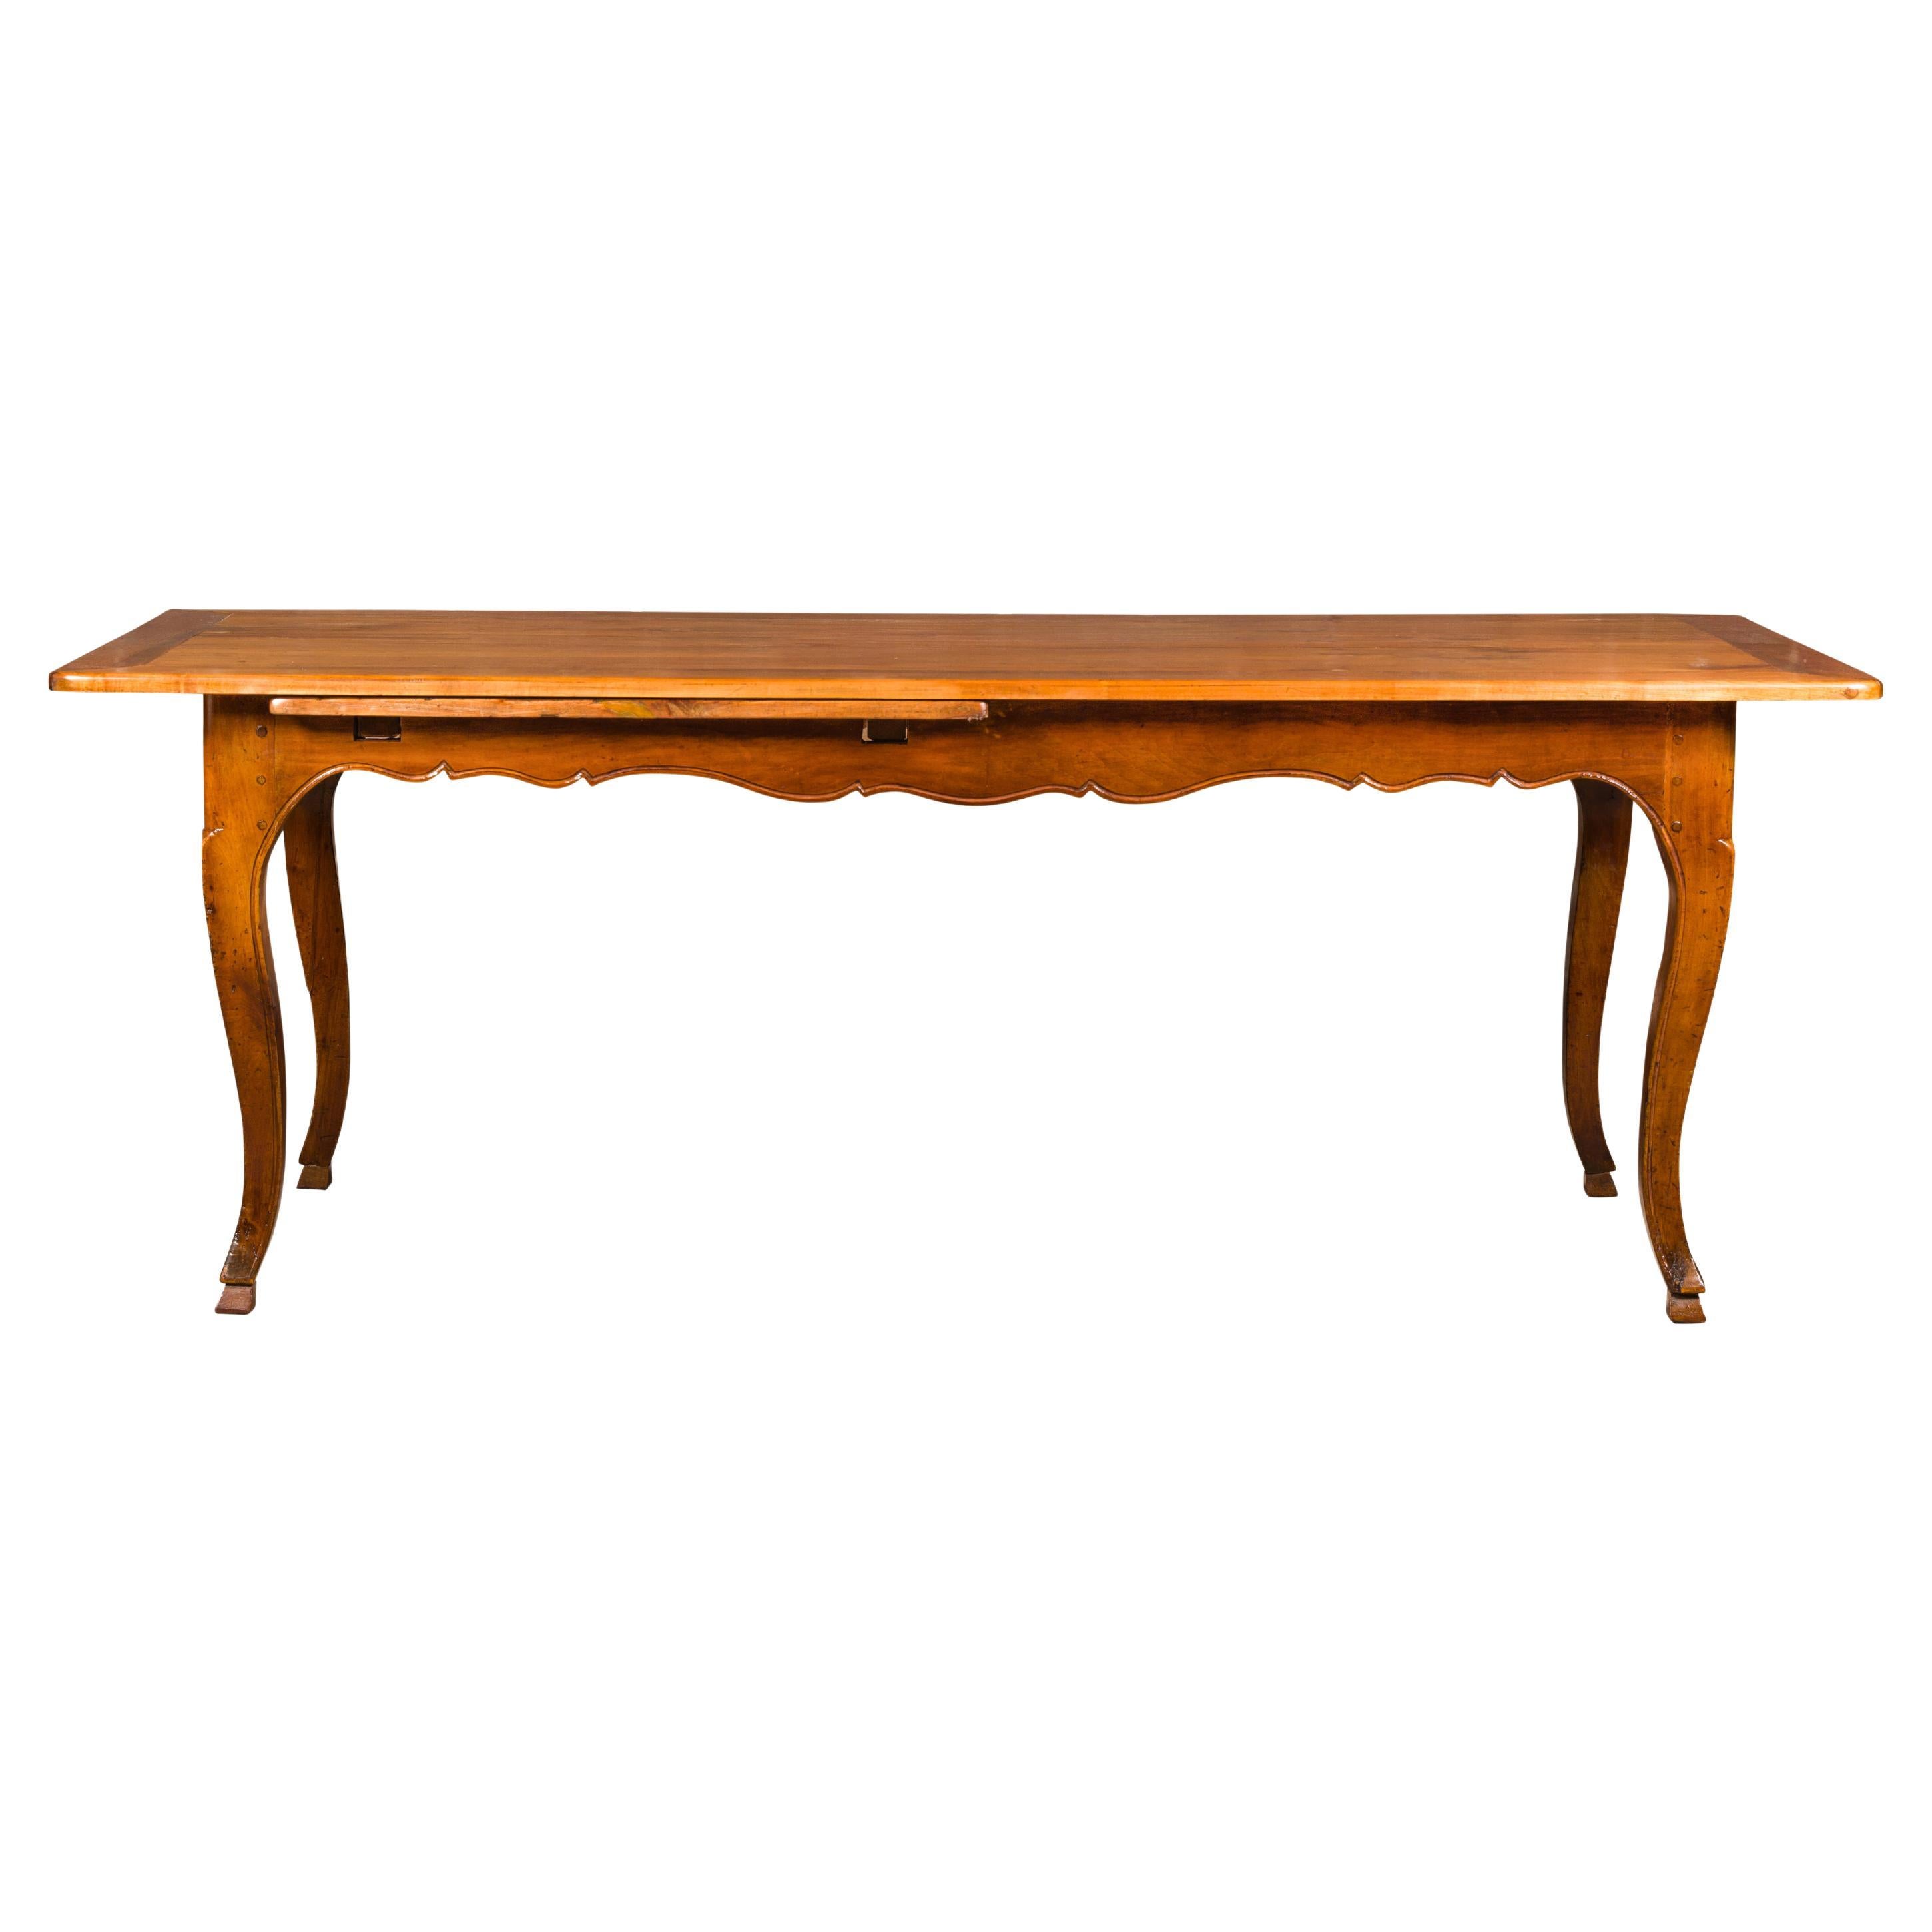 19th Century French Fruitwood Dining Table with Bread Board and Cabriole Legs